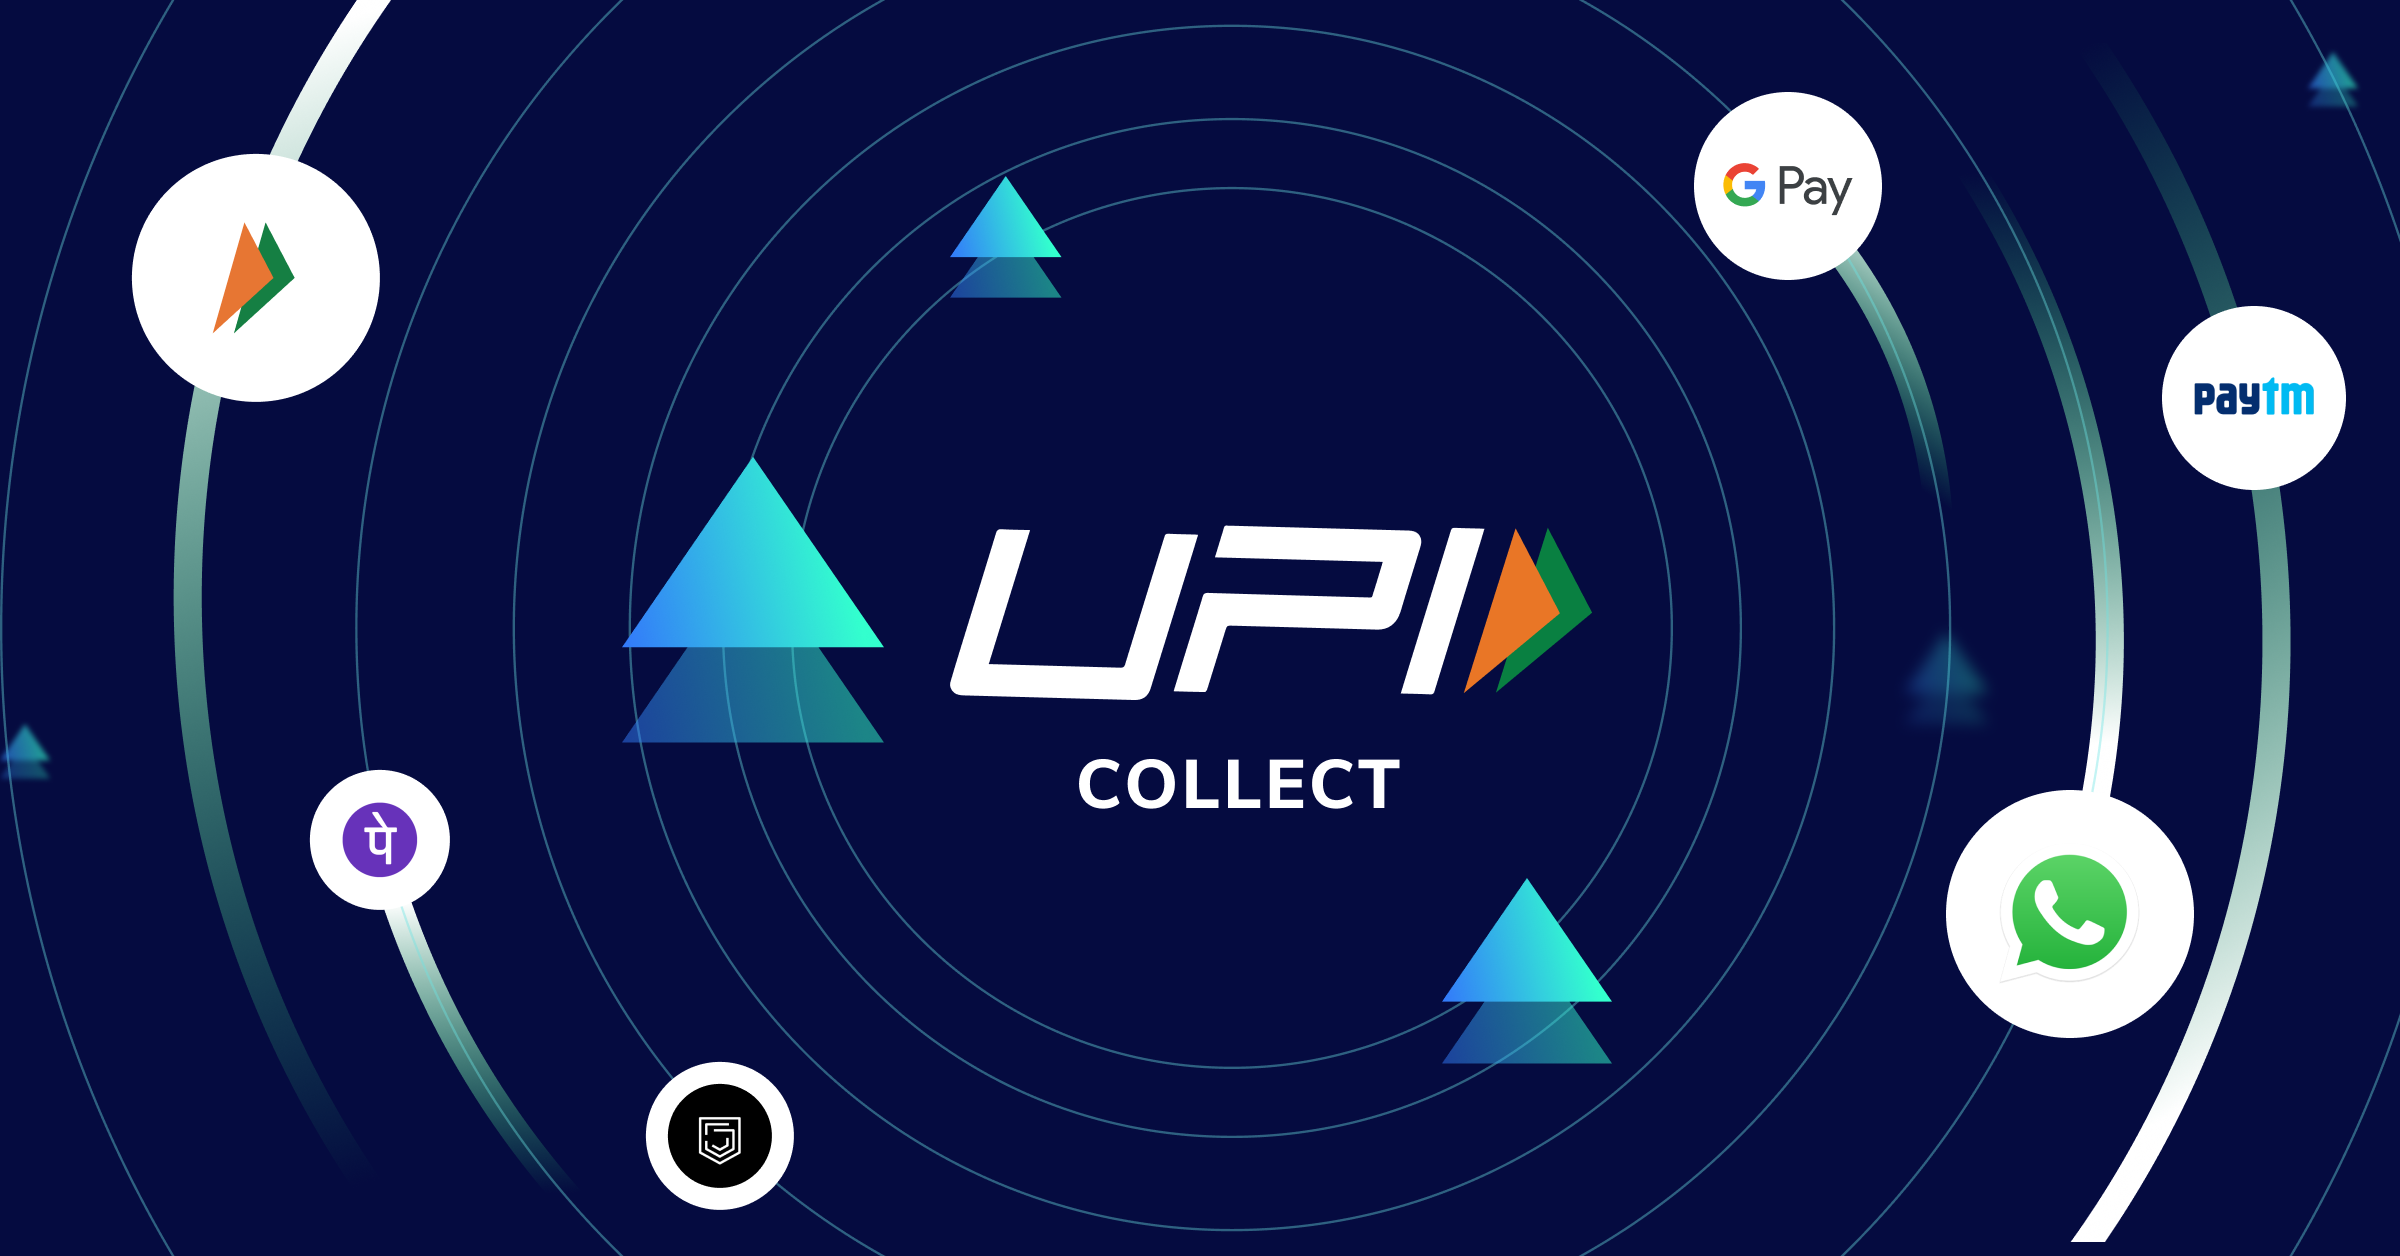 What Exactly Is Upi And How Does It Work